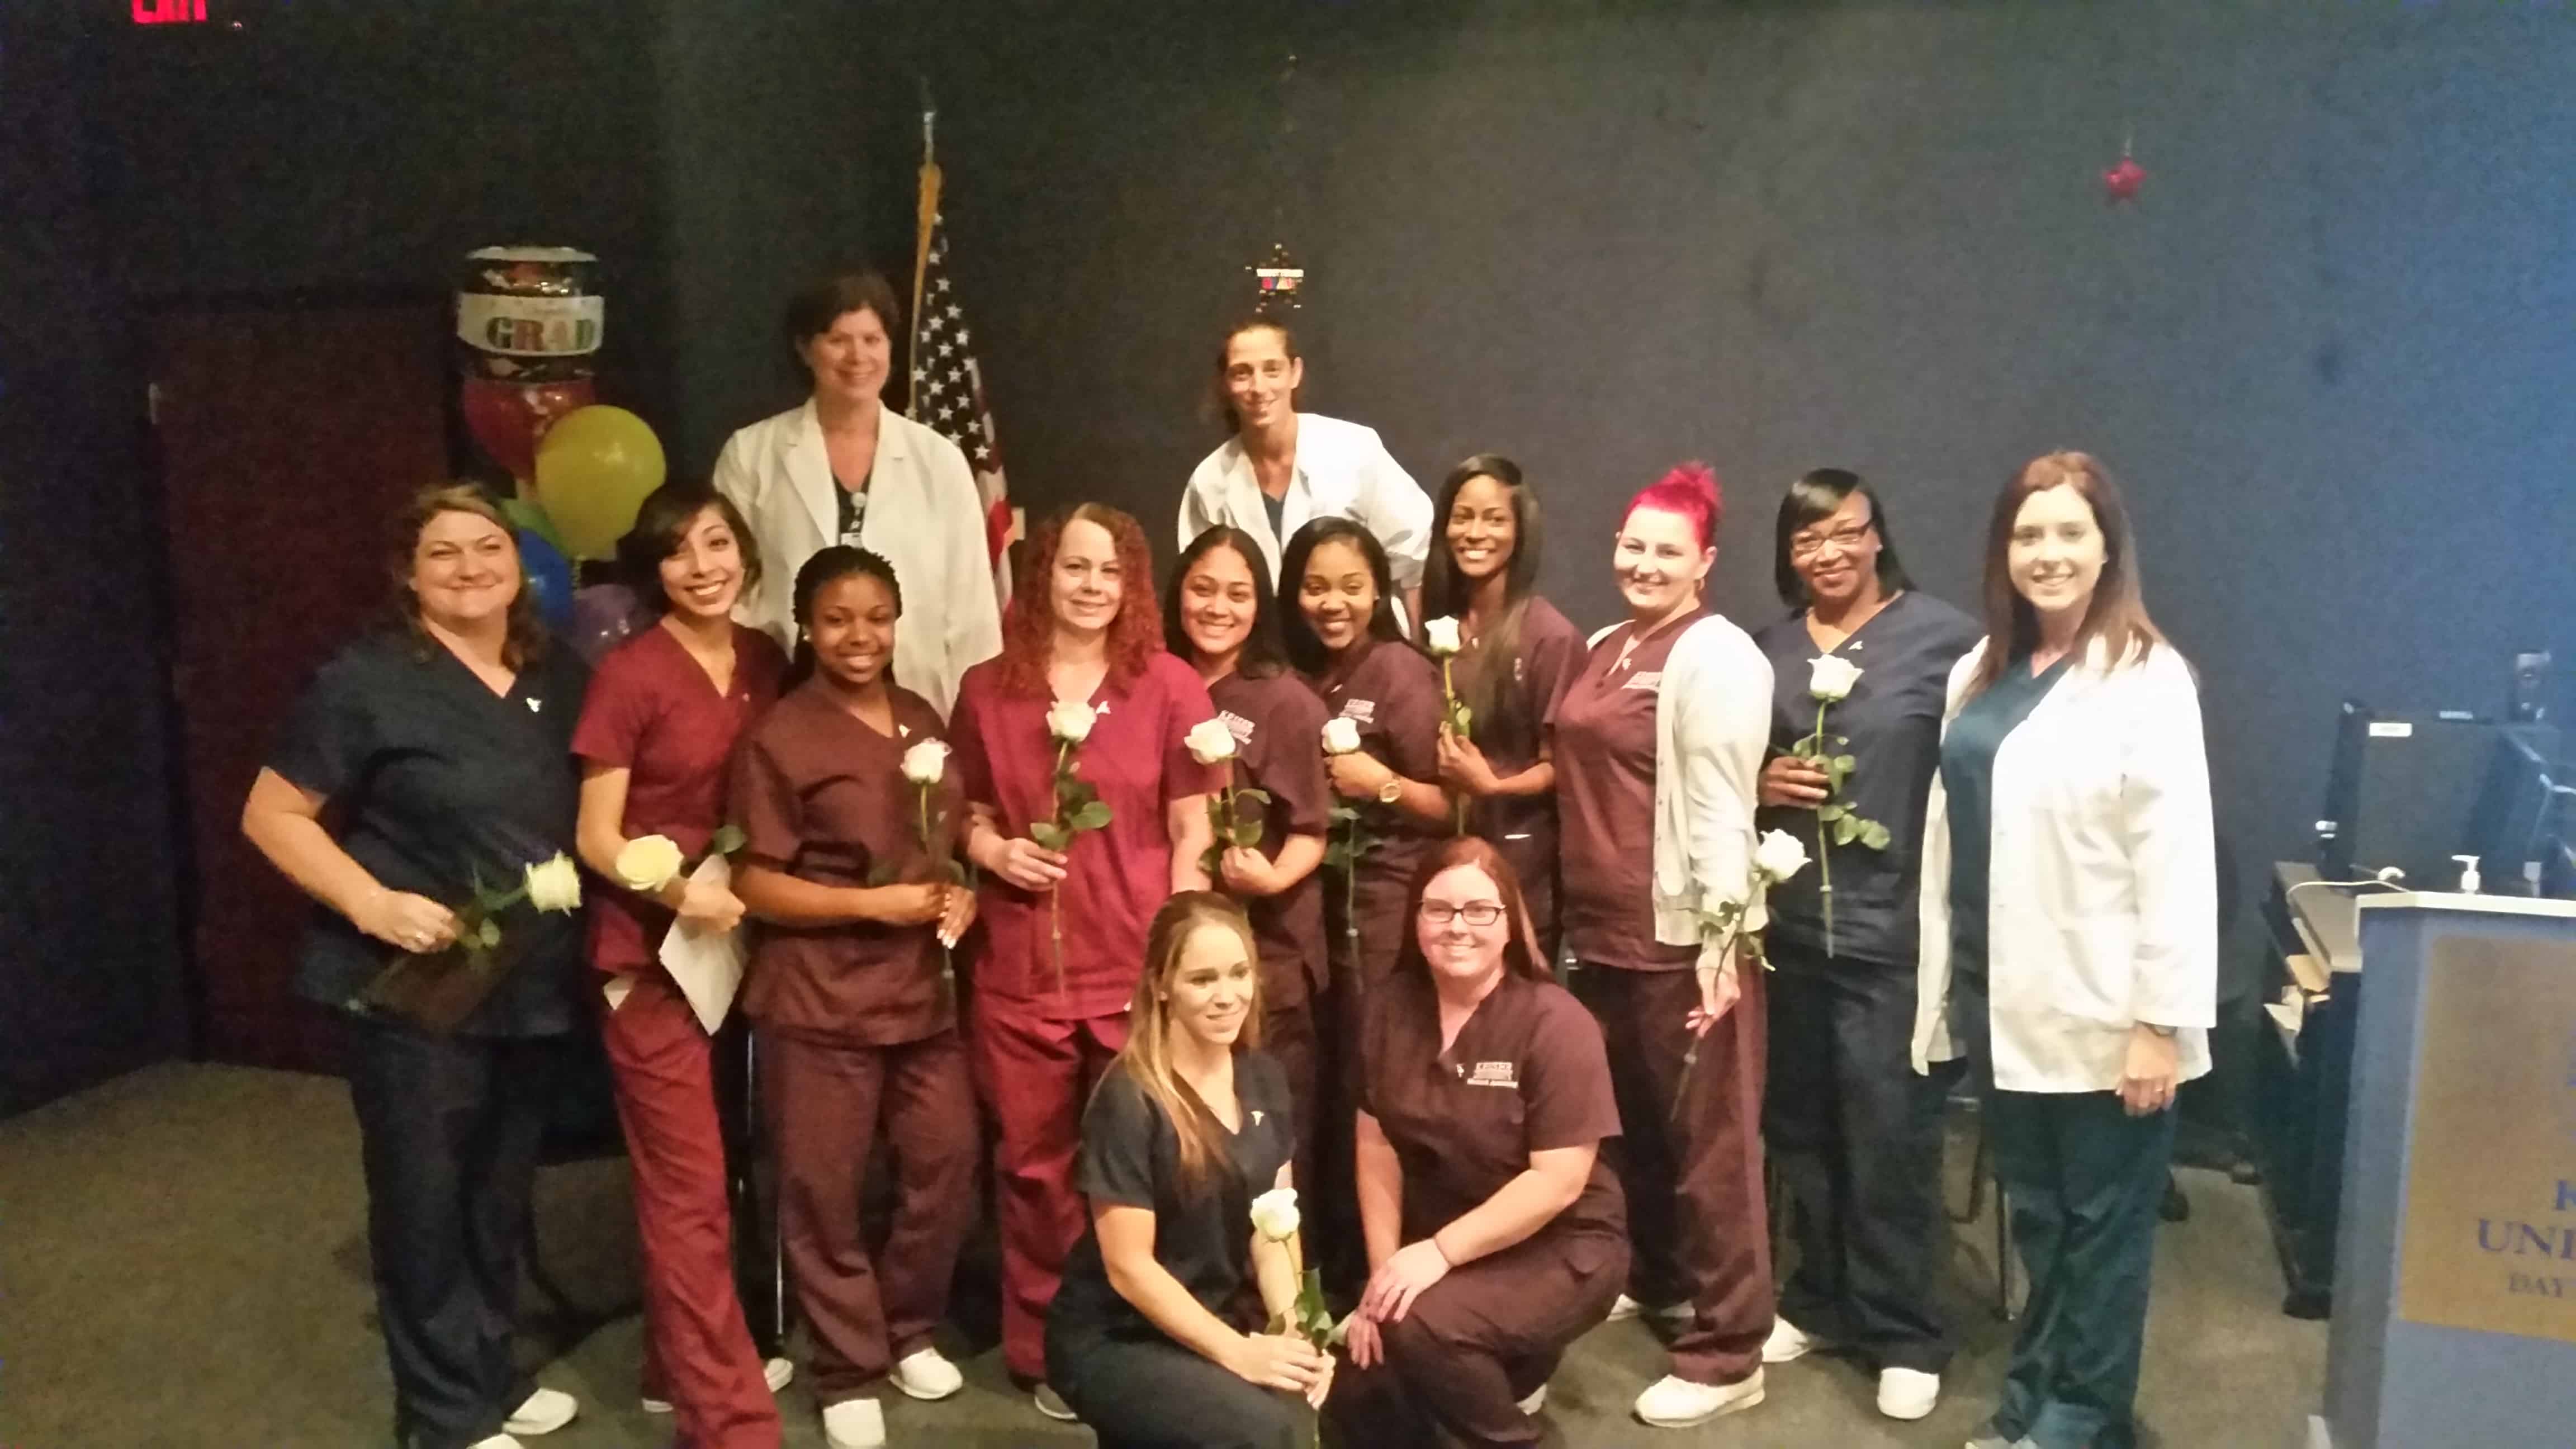 Daytona Holds a Pinning Ceremony for Medical Assisting Students